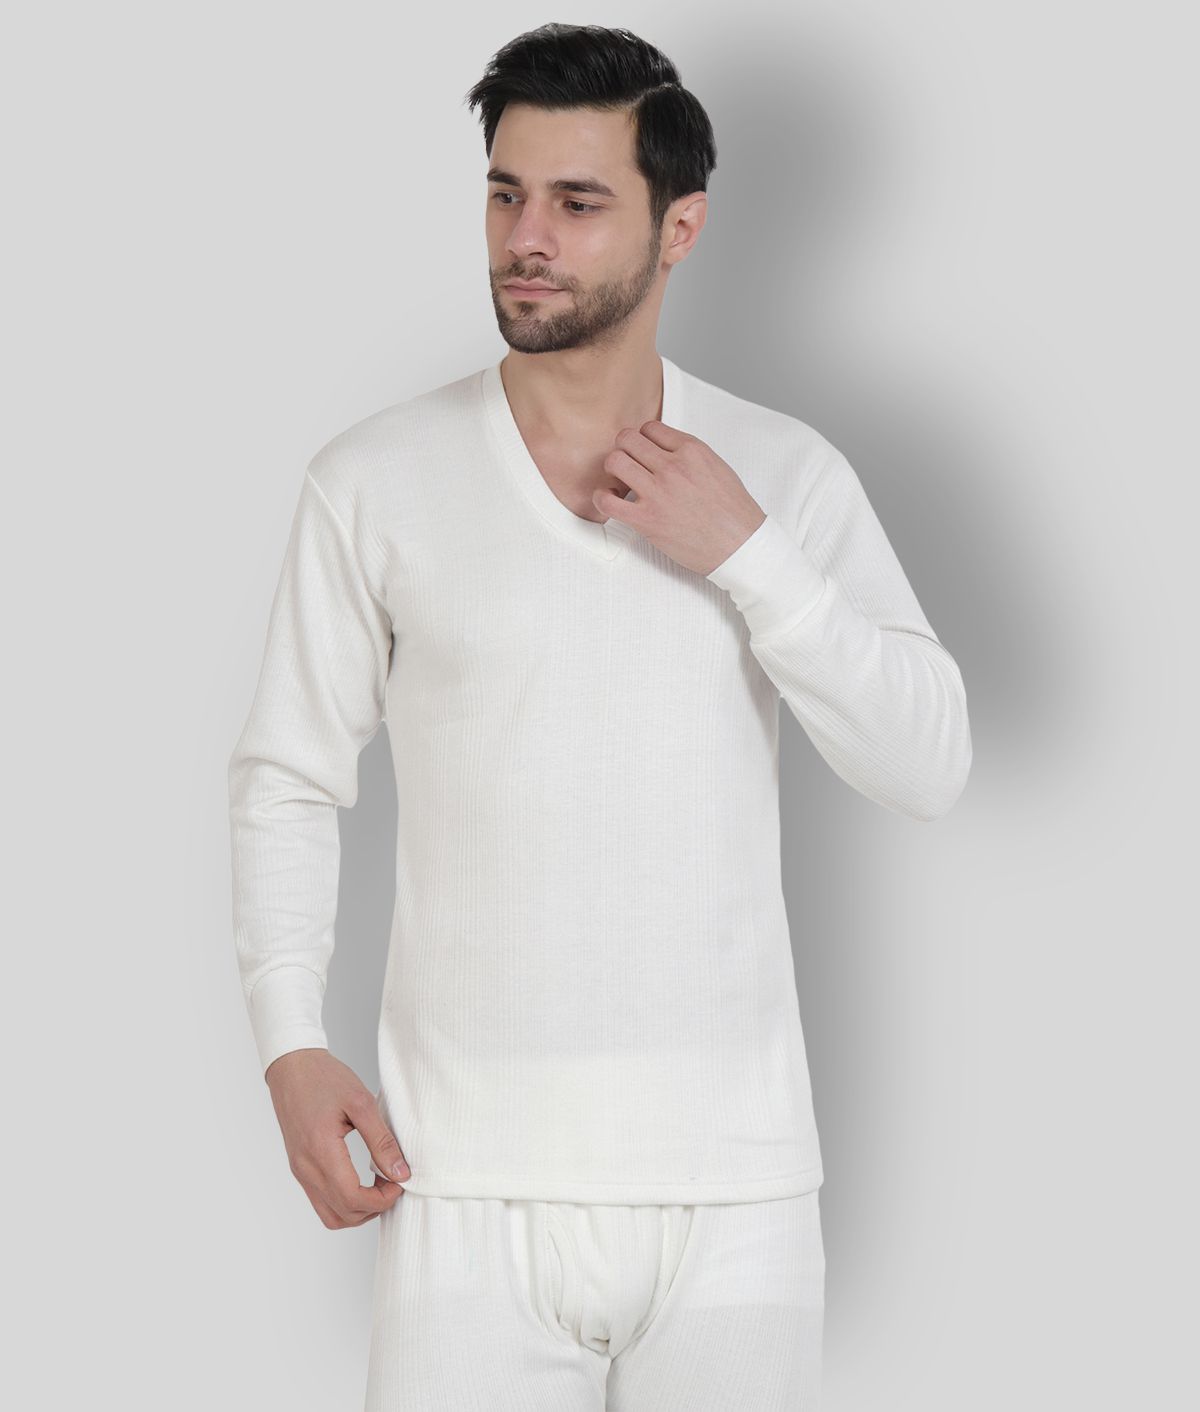     			Zeffit - White Cotton Blend Men's Thermal Tops ( Pack of 1 )